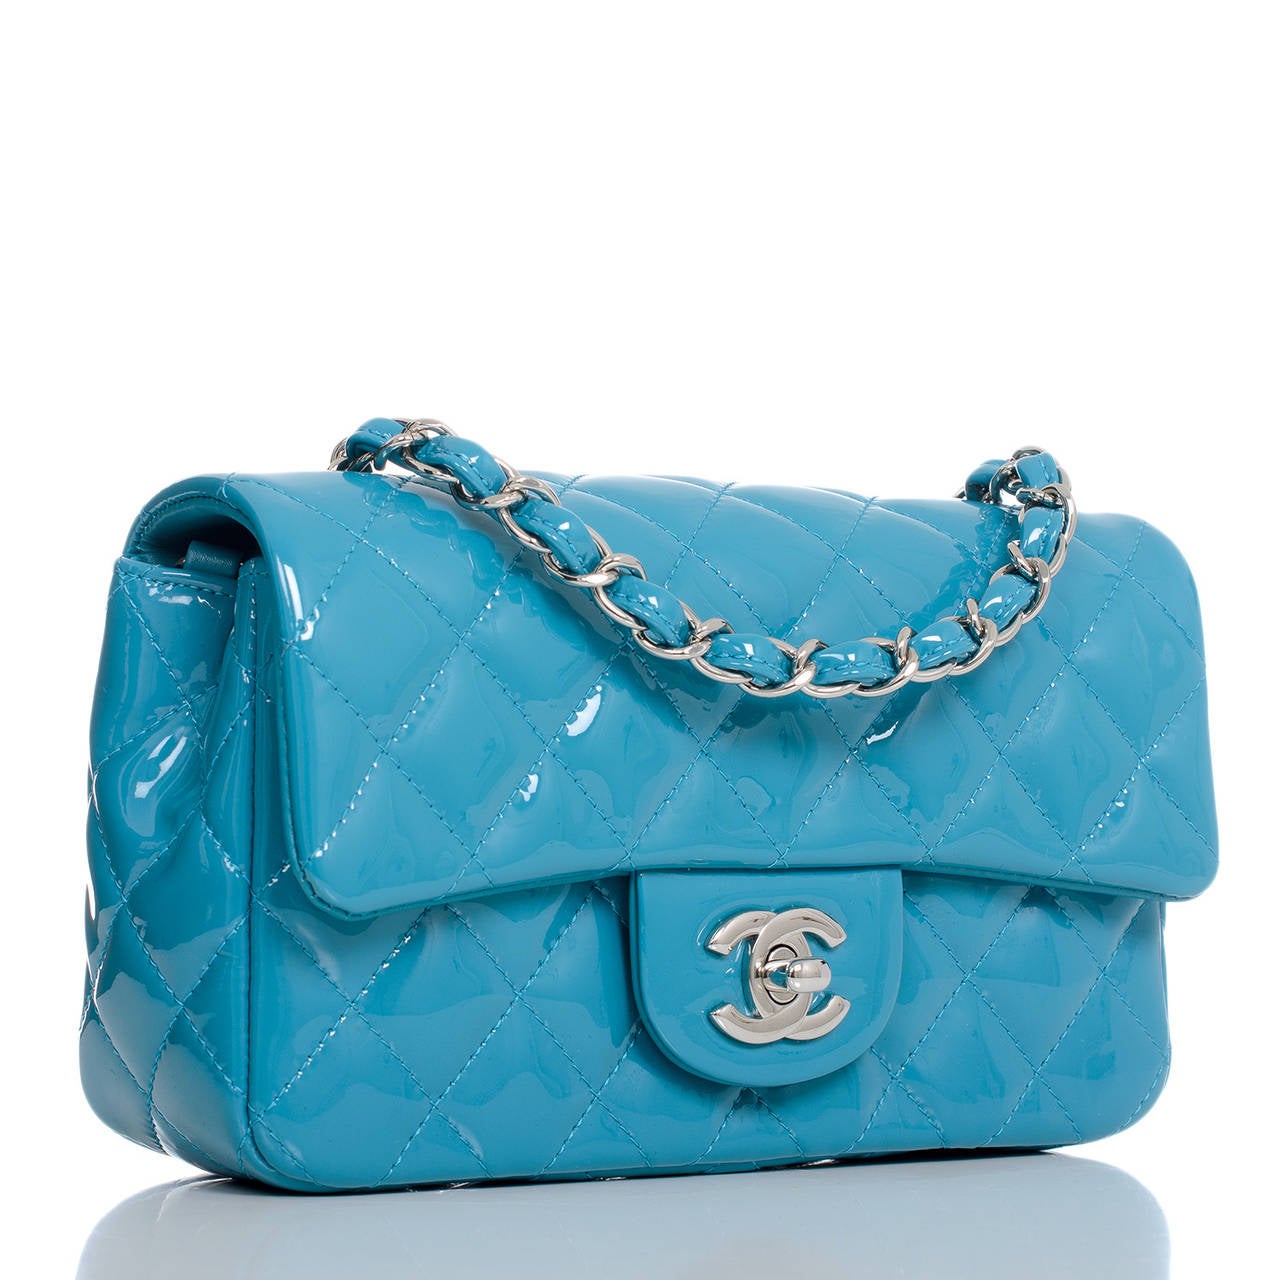 Chanel turquoise Small Classic flap bag in quilted patent leather with silver tone hardware.

This flap bag in turquoise quilted patent is the new small size -- compact and sophisticated with greater room than the crossbody mini or WOC. Worn on